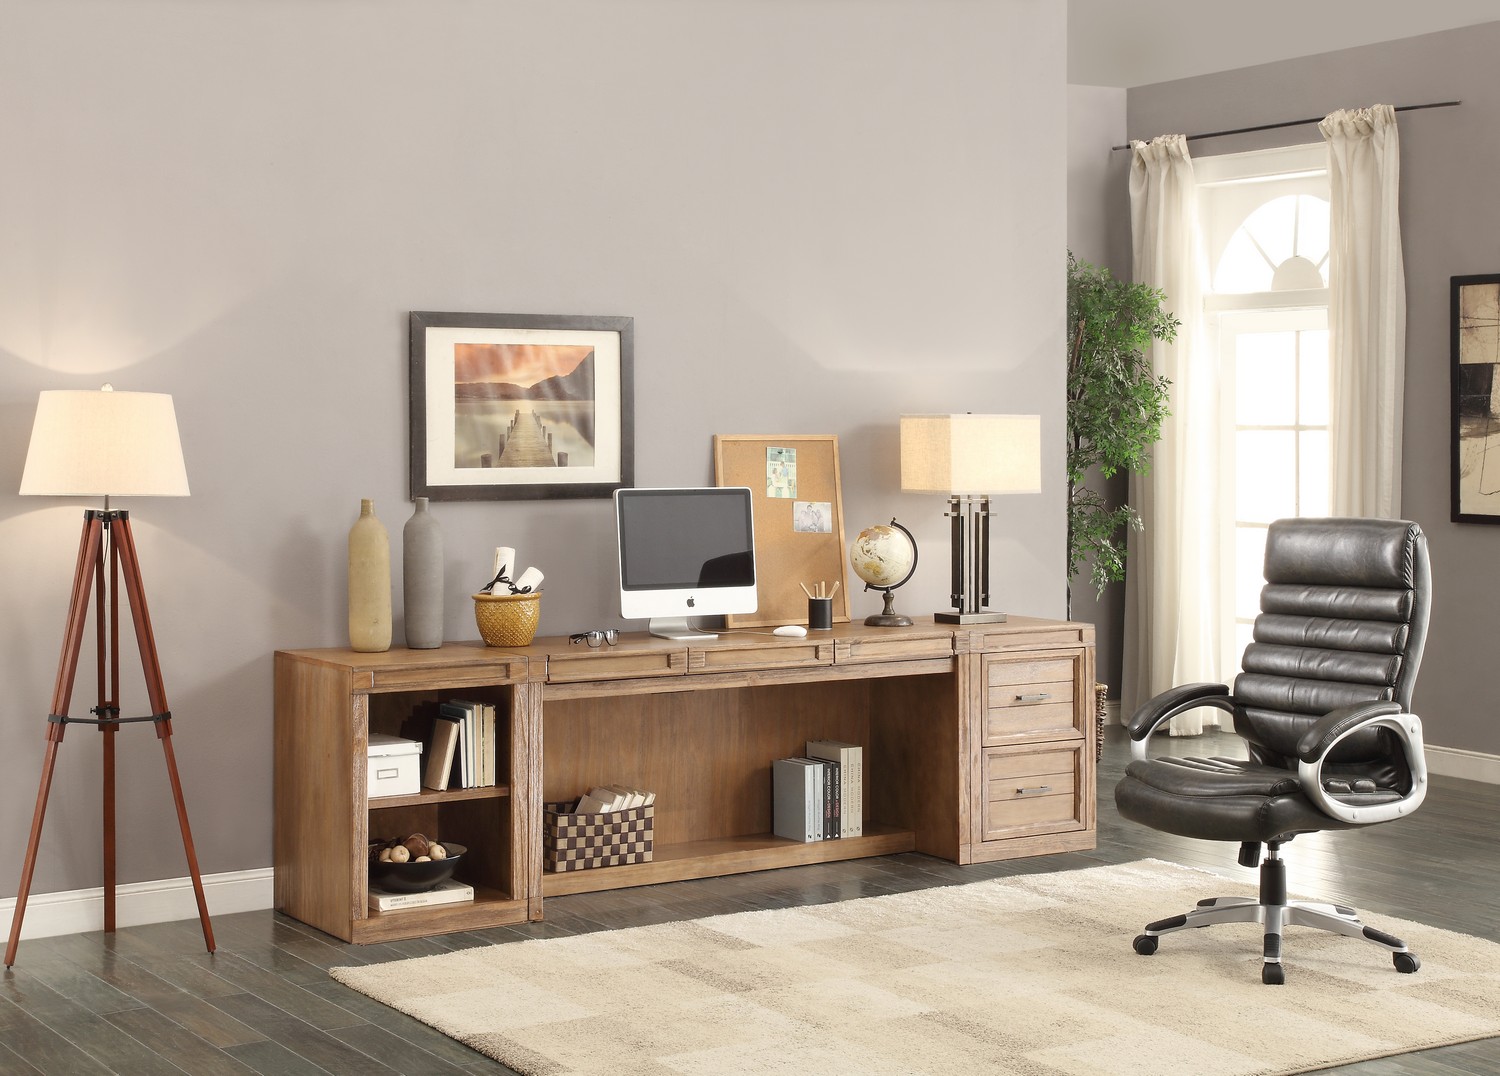 Parker House Hickory Creek Desk Sets with Drawers